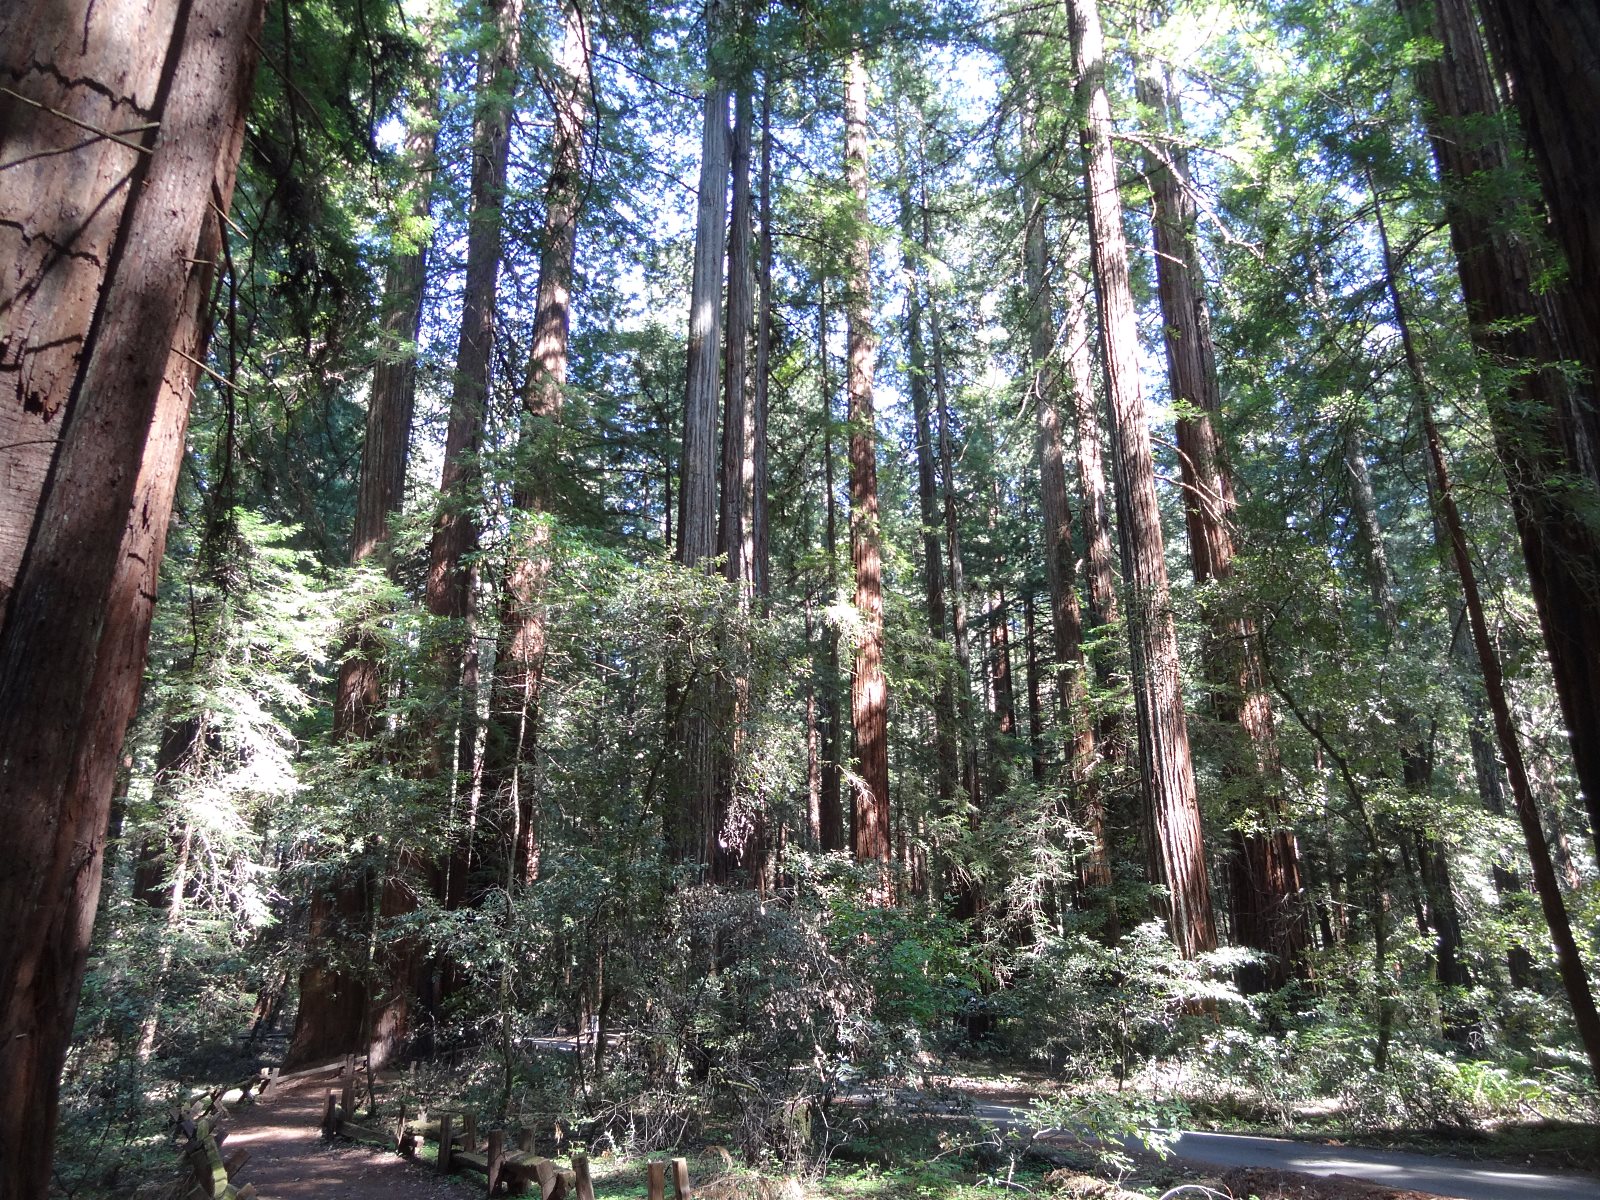 I told the guide at the State Parks Visitor Center that I planned to go to Muir Woods. He said that back about 15 miles at Guerneville was the Armstrong Redwood Grove that was nicer in ways and far less crowed. I'm glad I went back.